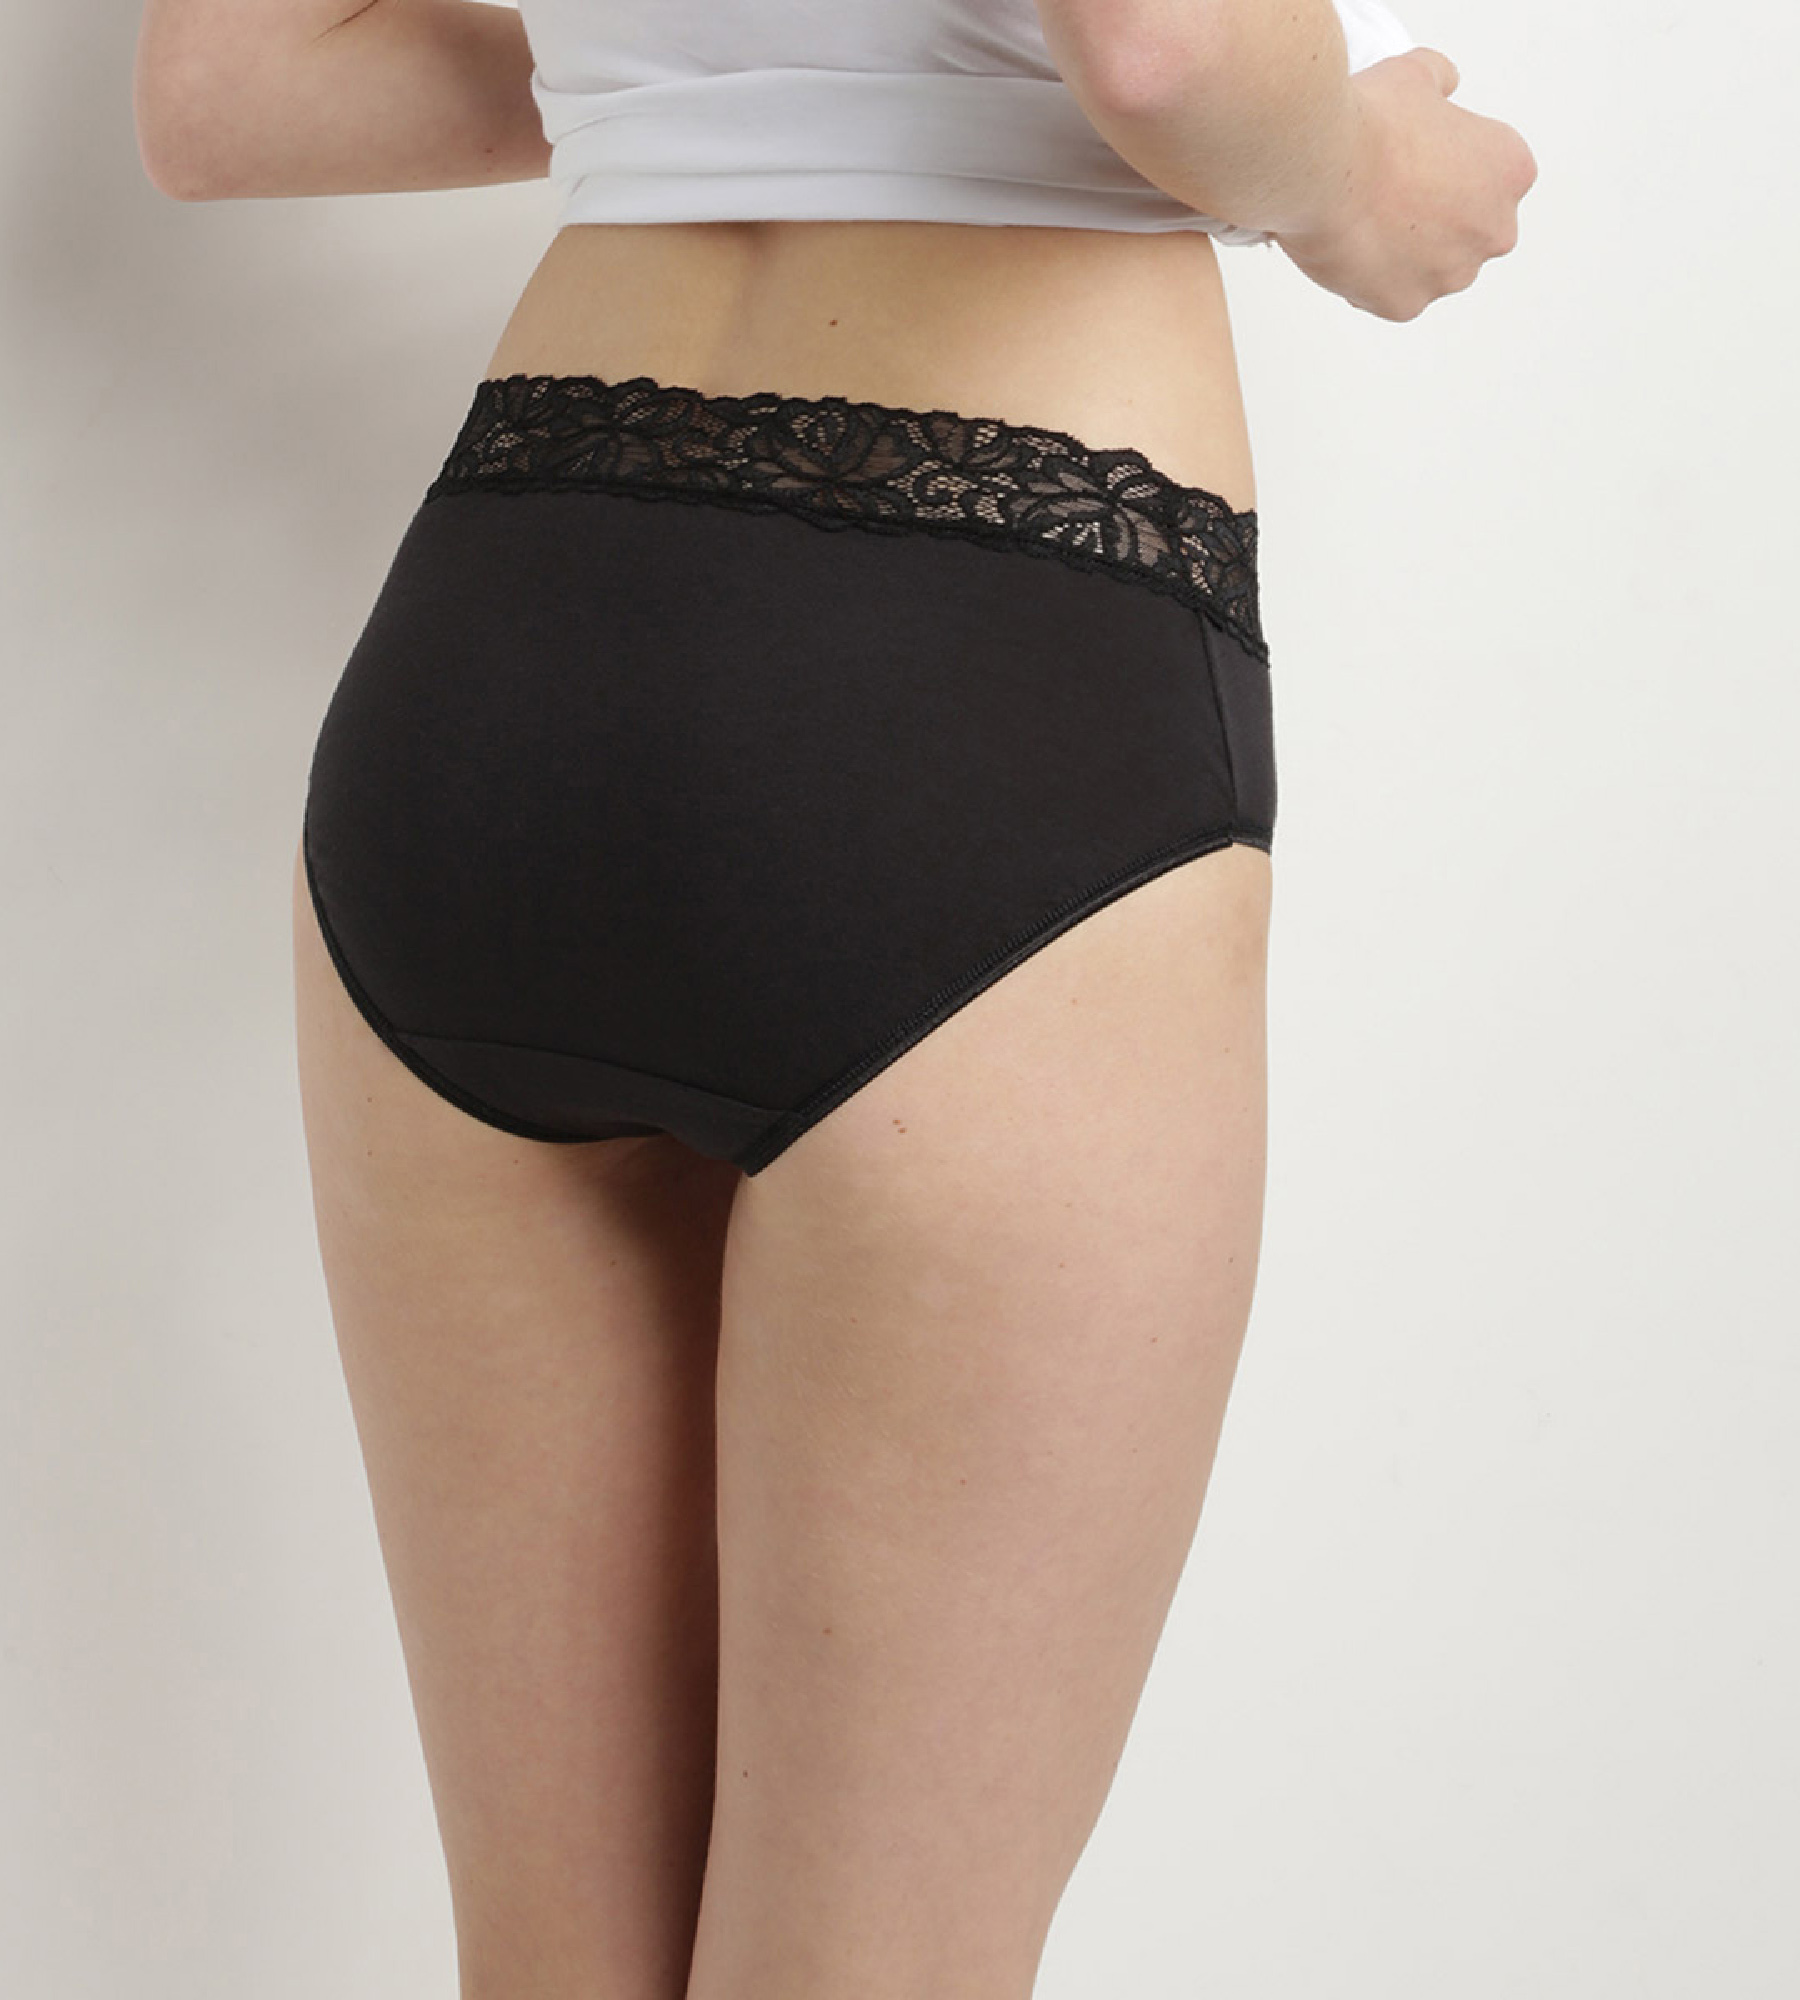 Black/White High Rise Lace Knickers 2 Pack